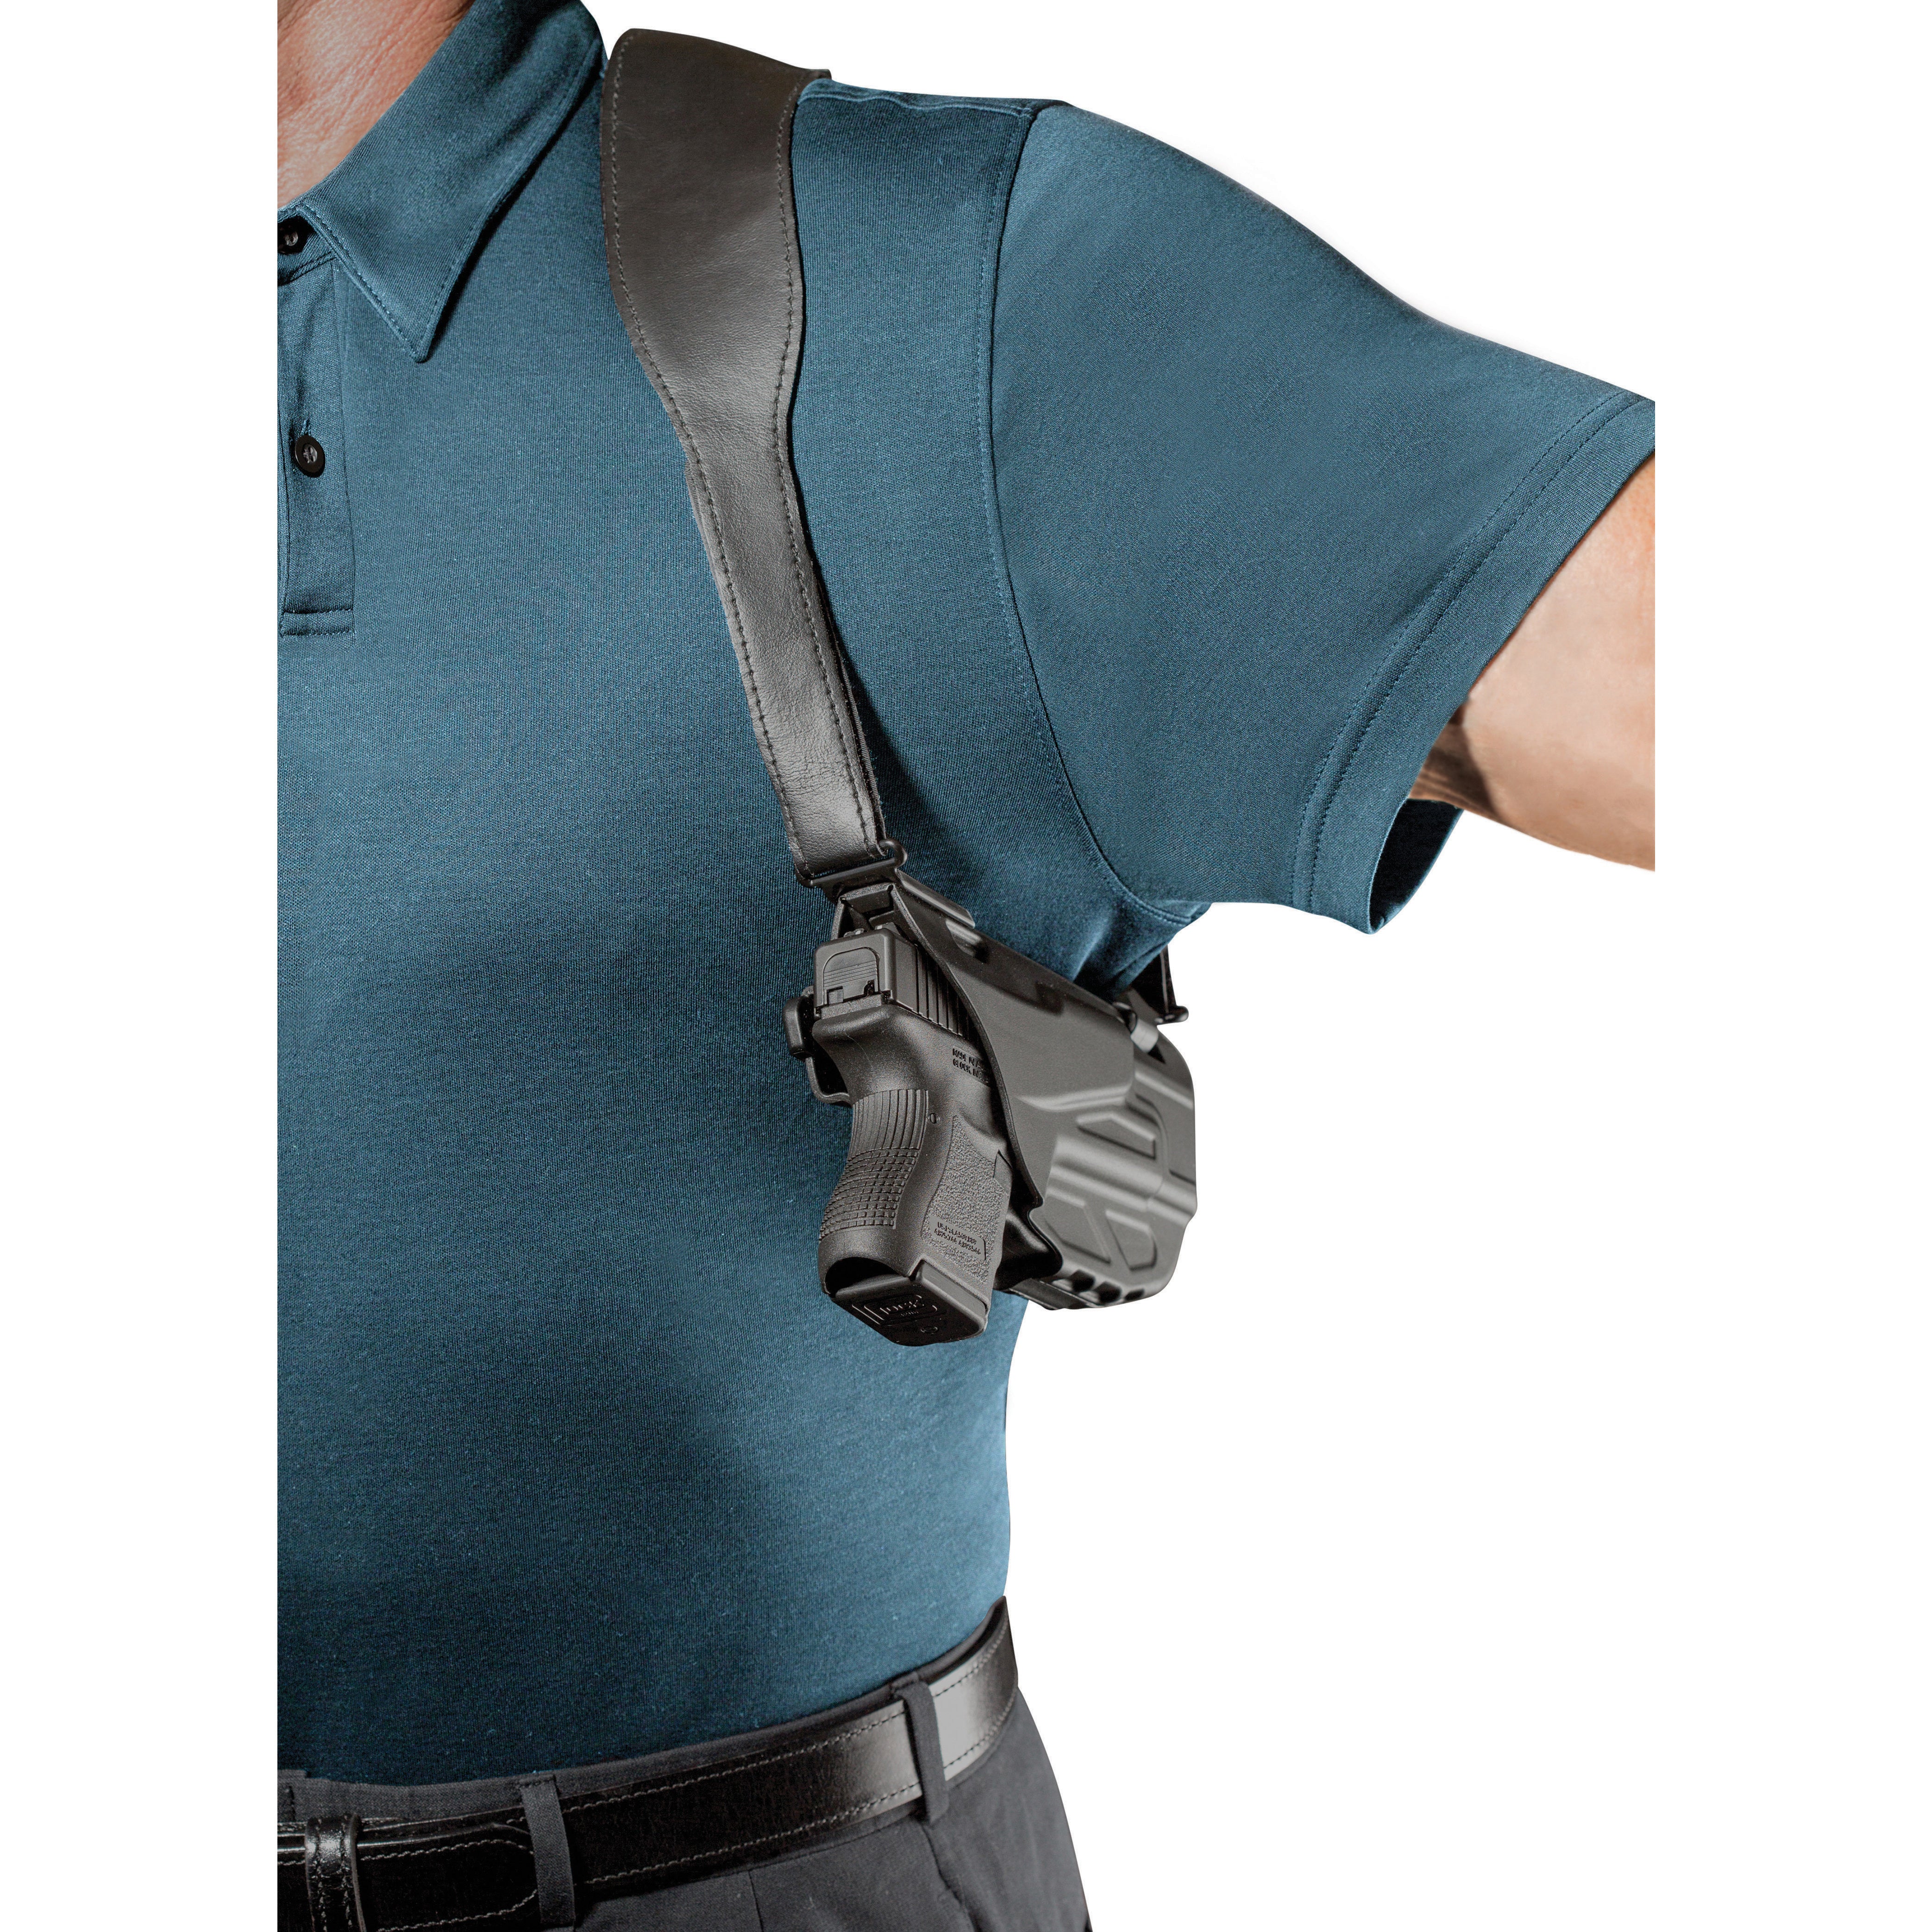 Shoulder Holsters distributed by Just Holster It, LLC